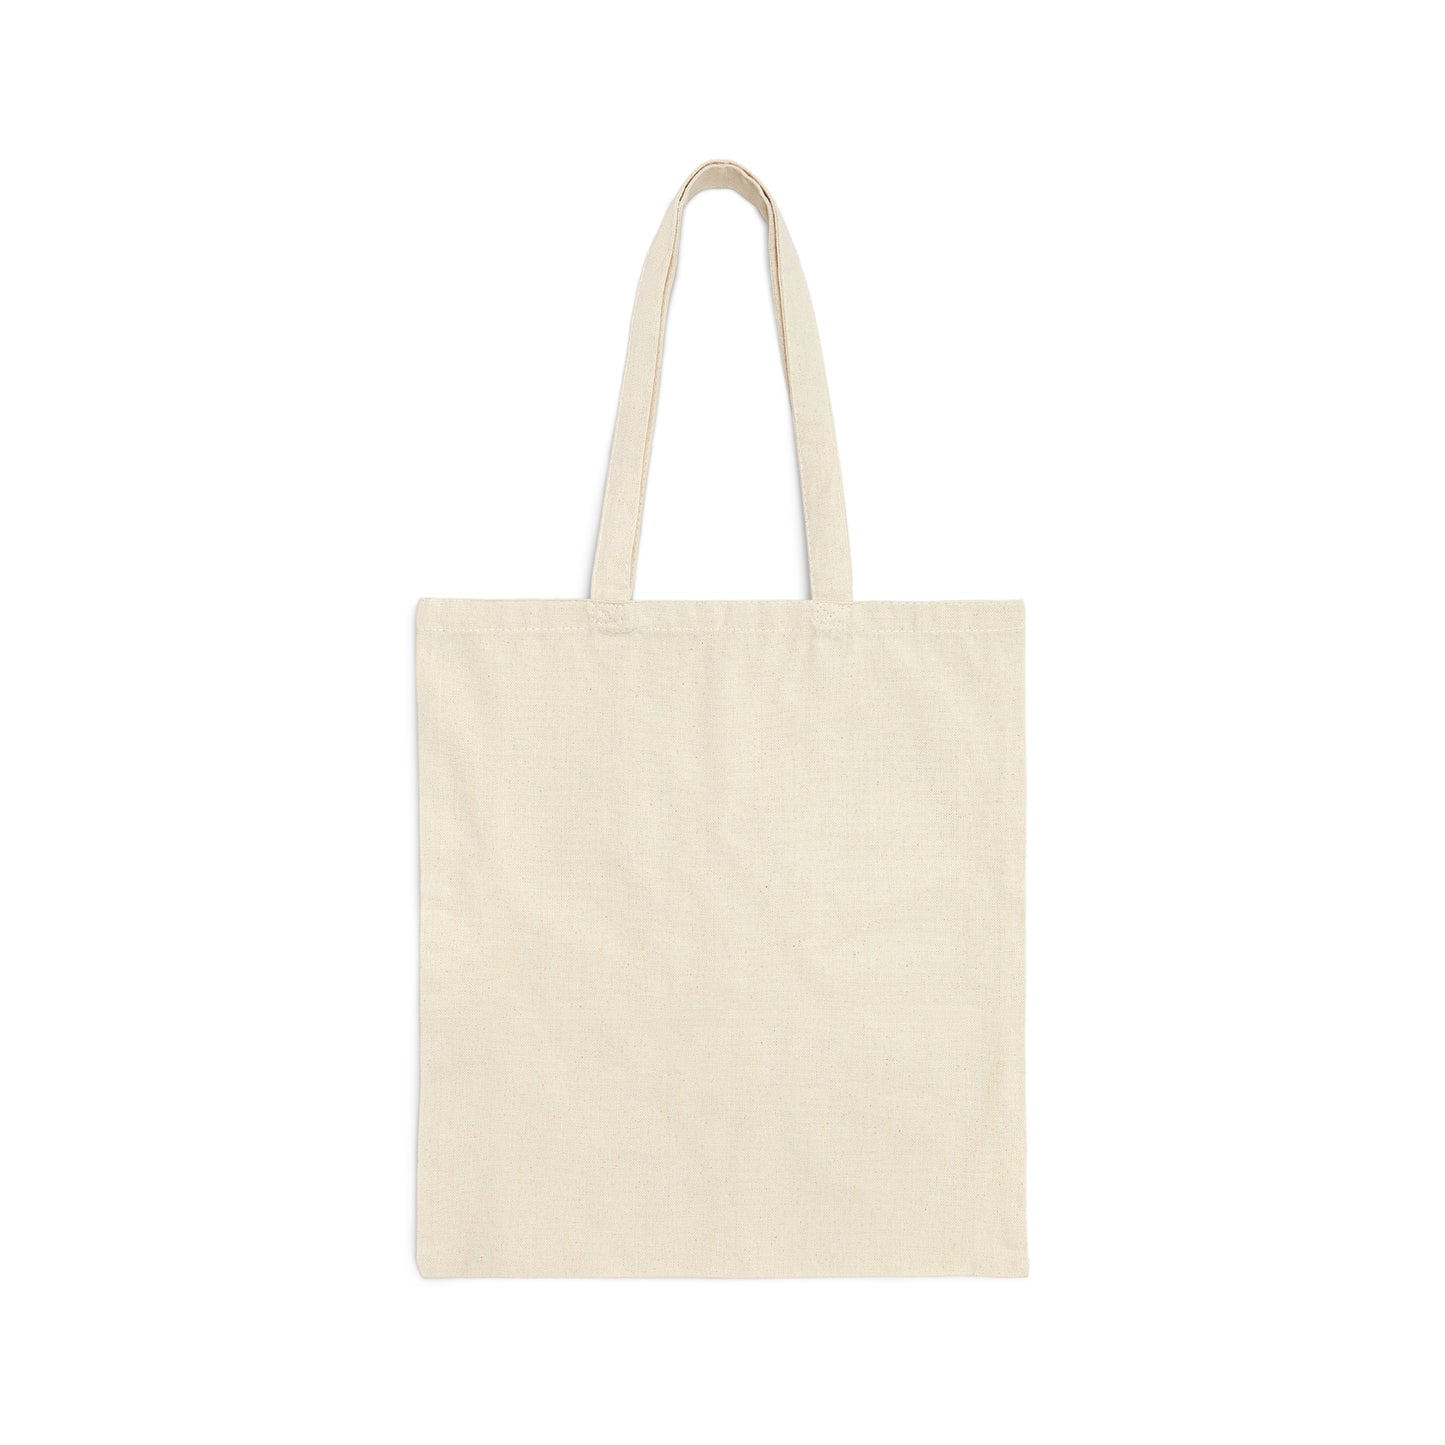 Detroit 'Old English D' Light Tote Bag (French Edition)